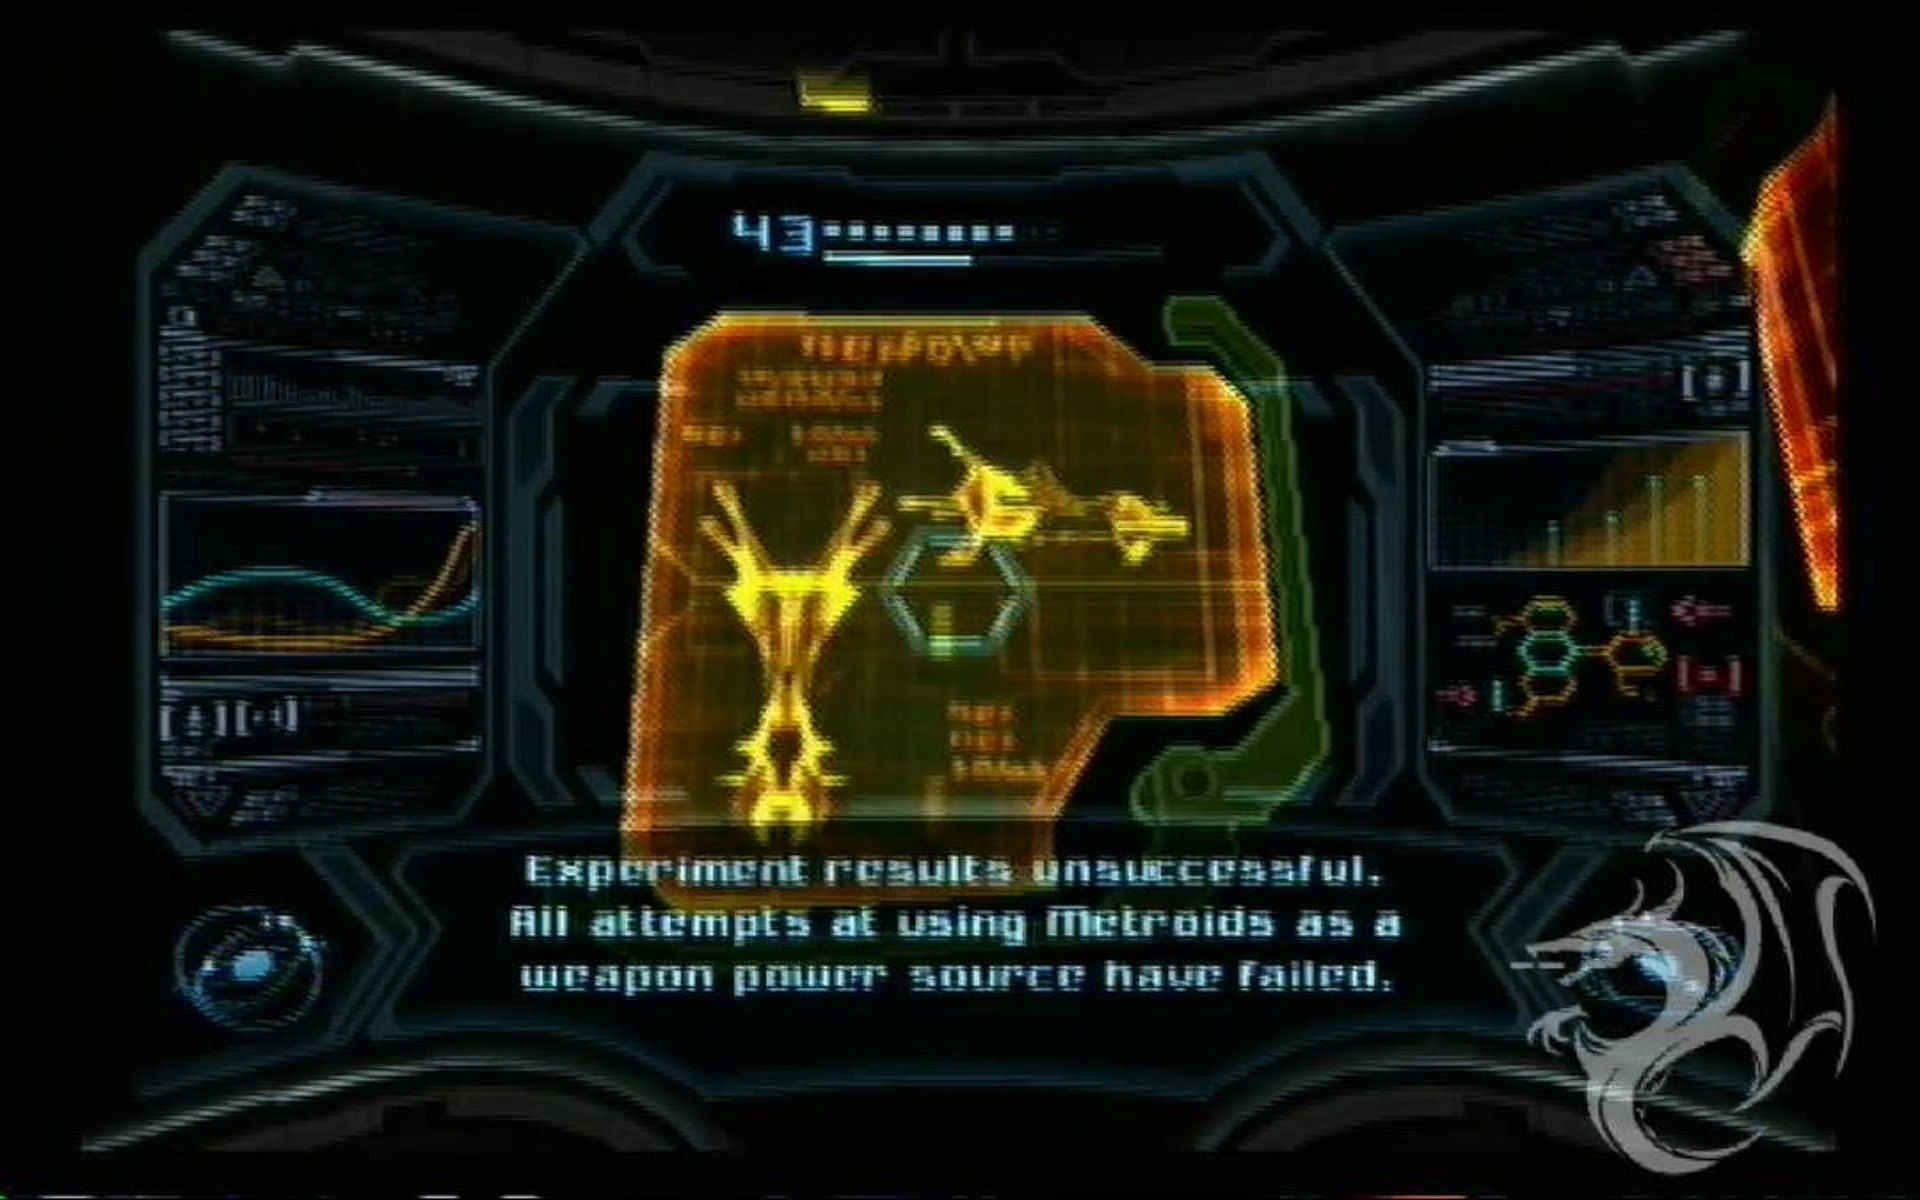 Dread was even referenced in the third game in the Prime series (Image via Metroid Hunters)